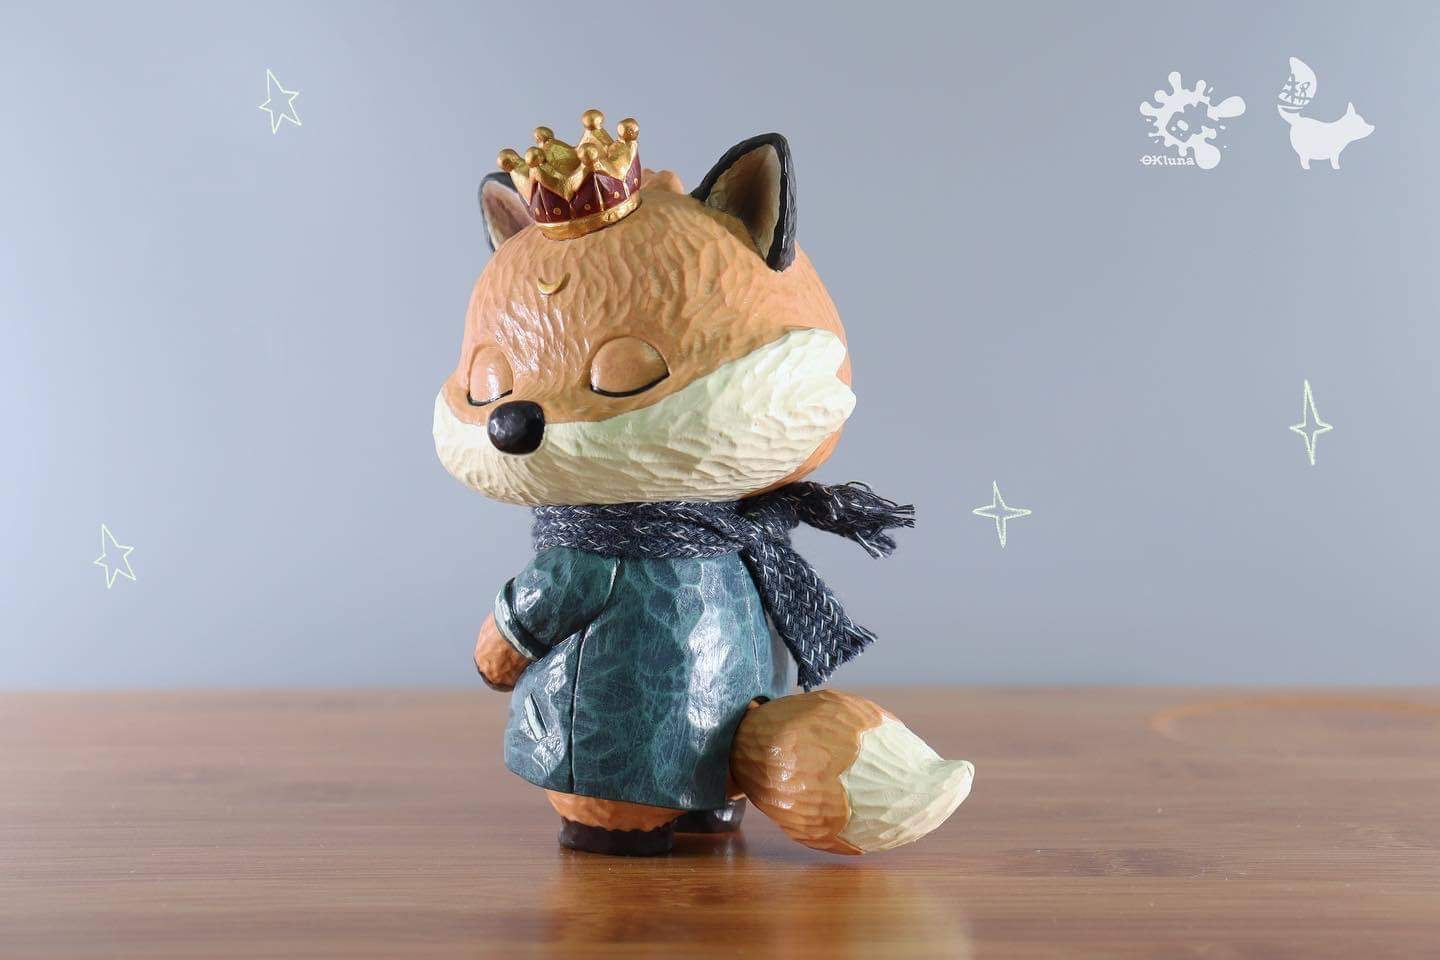 Okluna x Woodcarving animals: The king of another world